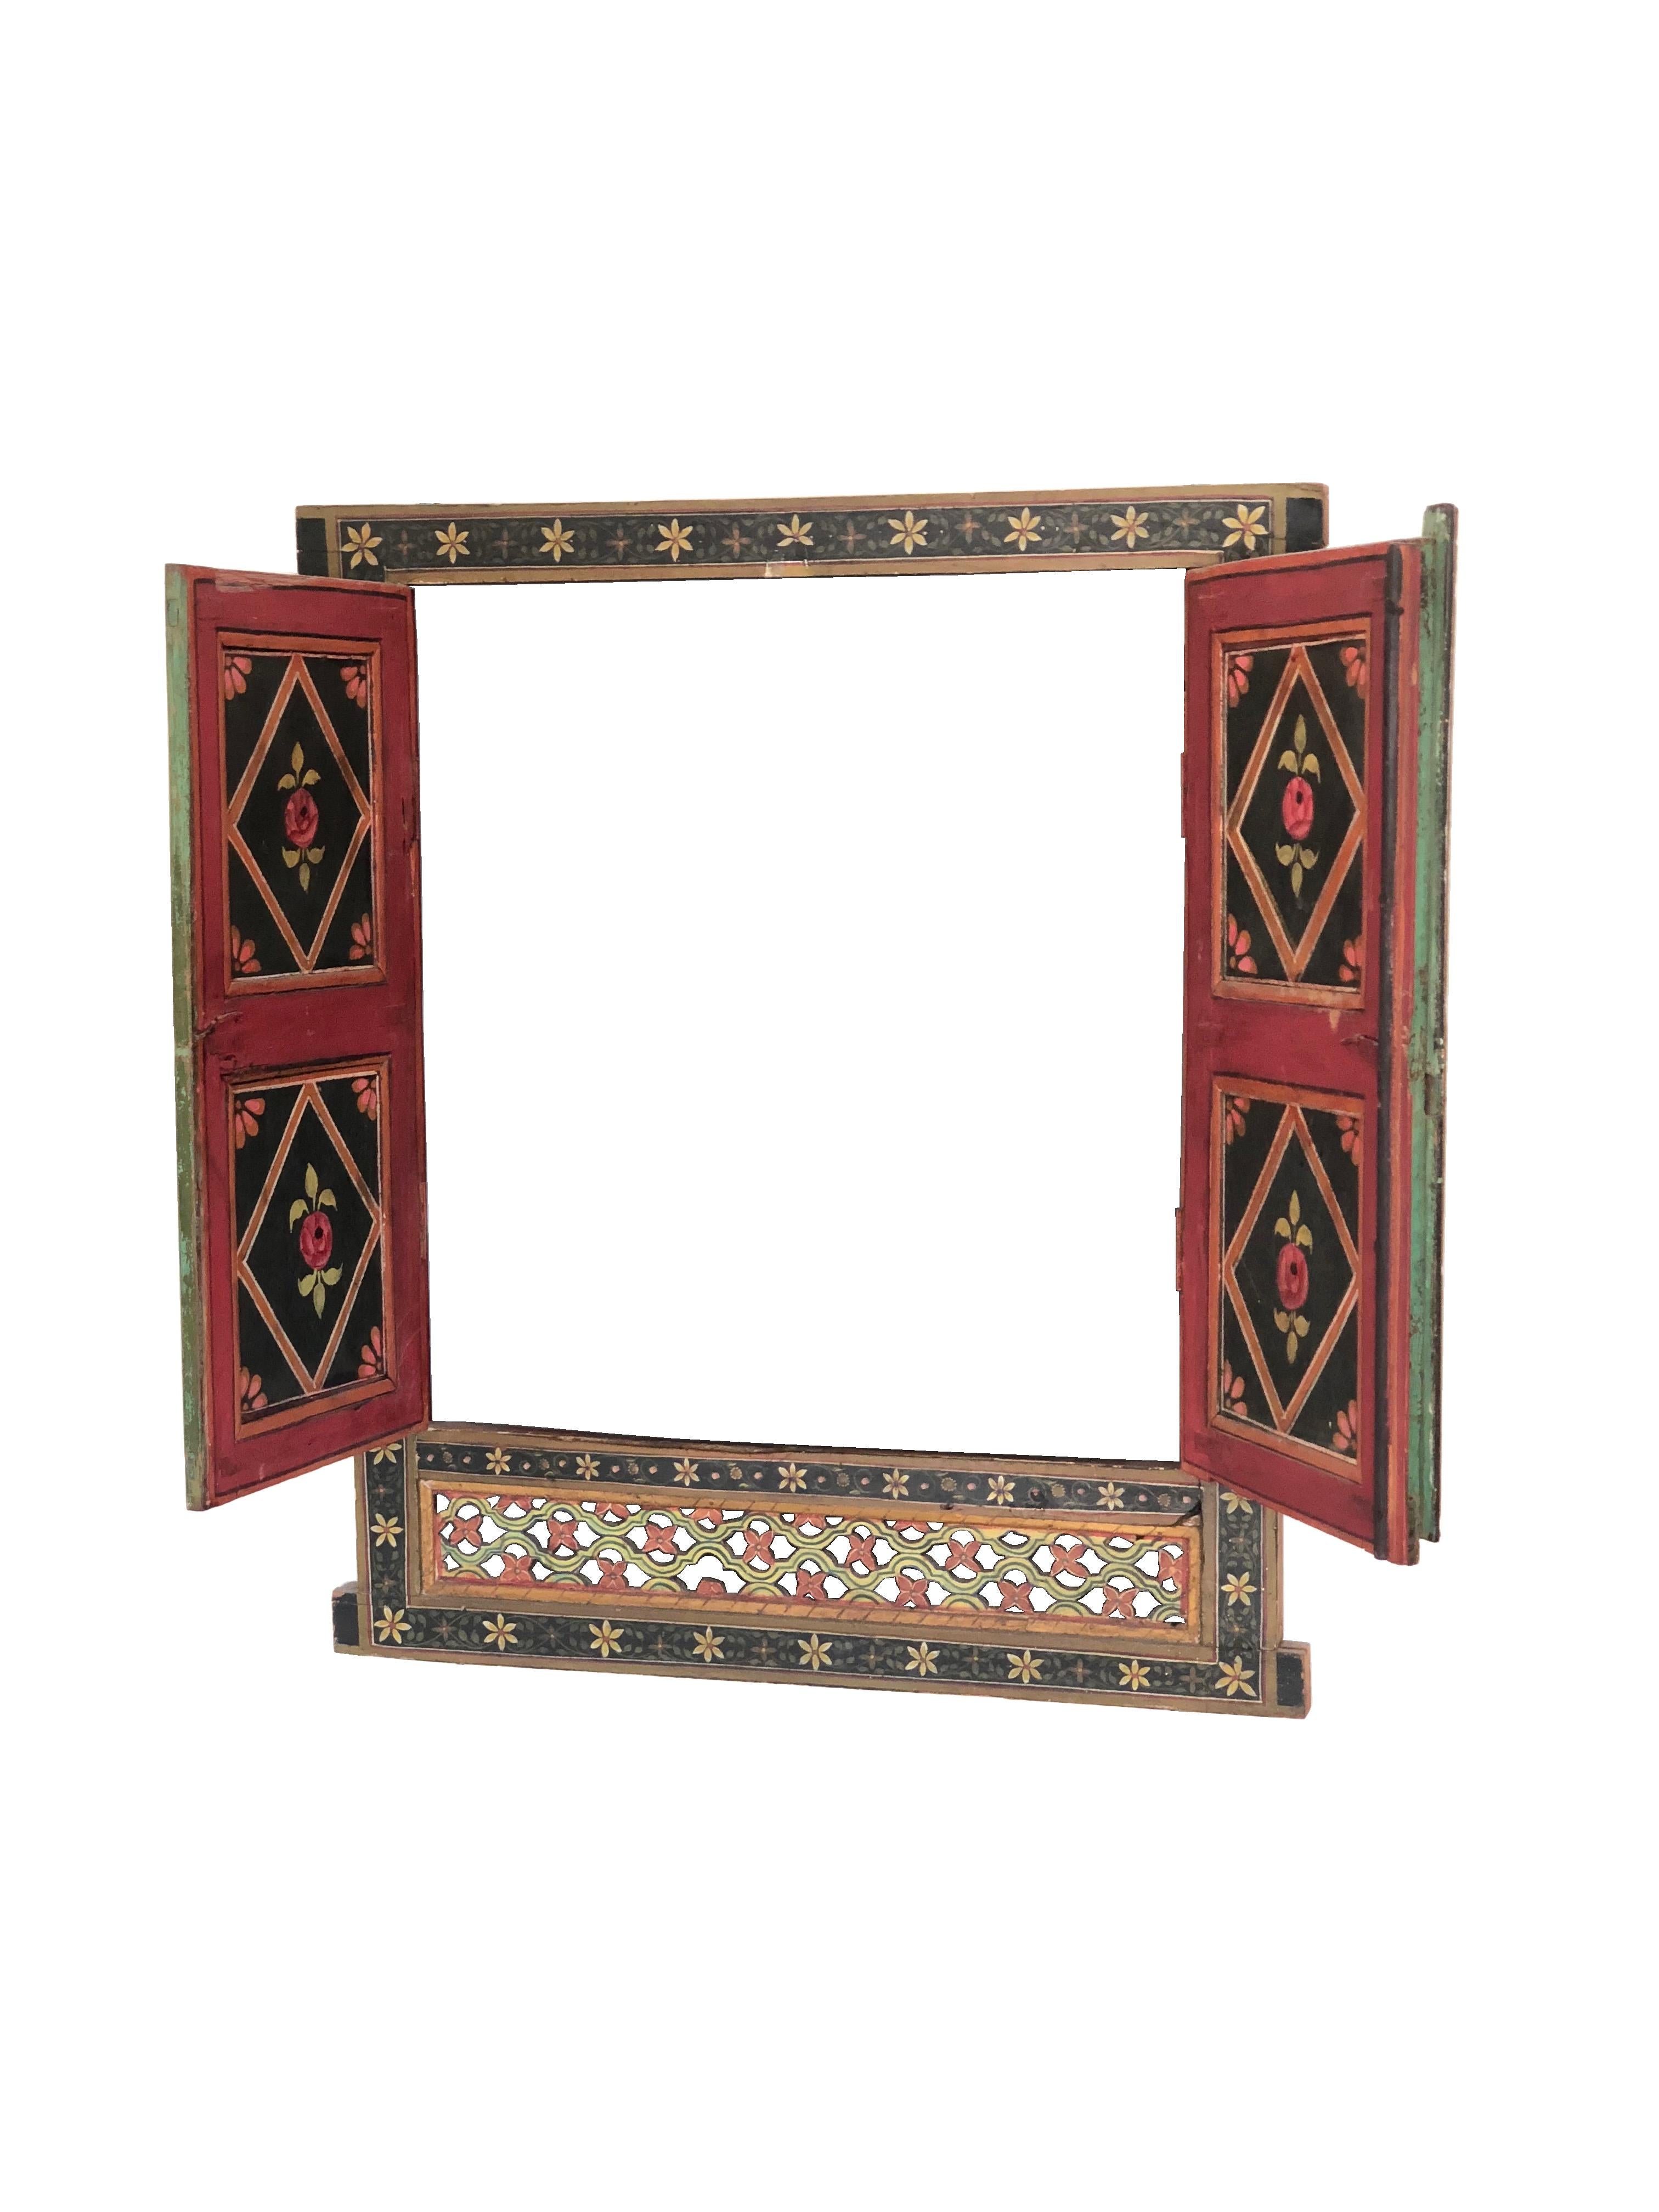 Original ancient Indian window depicting two dancers, a female and a male, intent in their moves and in typical customs. Floral themes in the frame. The window is made of hand painted and hand carved wood.
Perfect to be used as ornamental in the